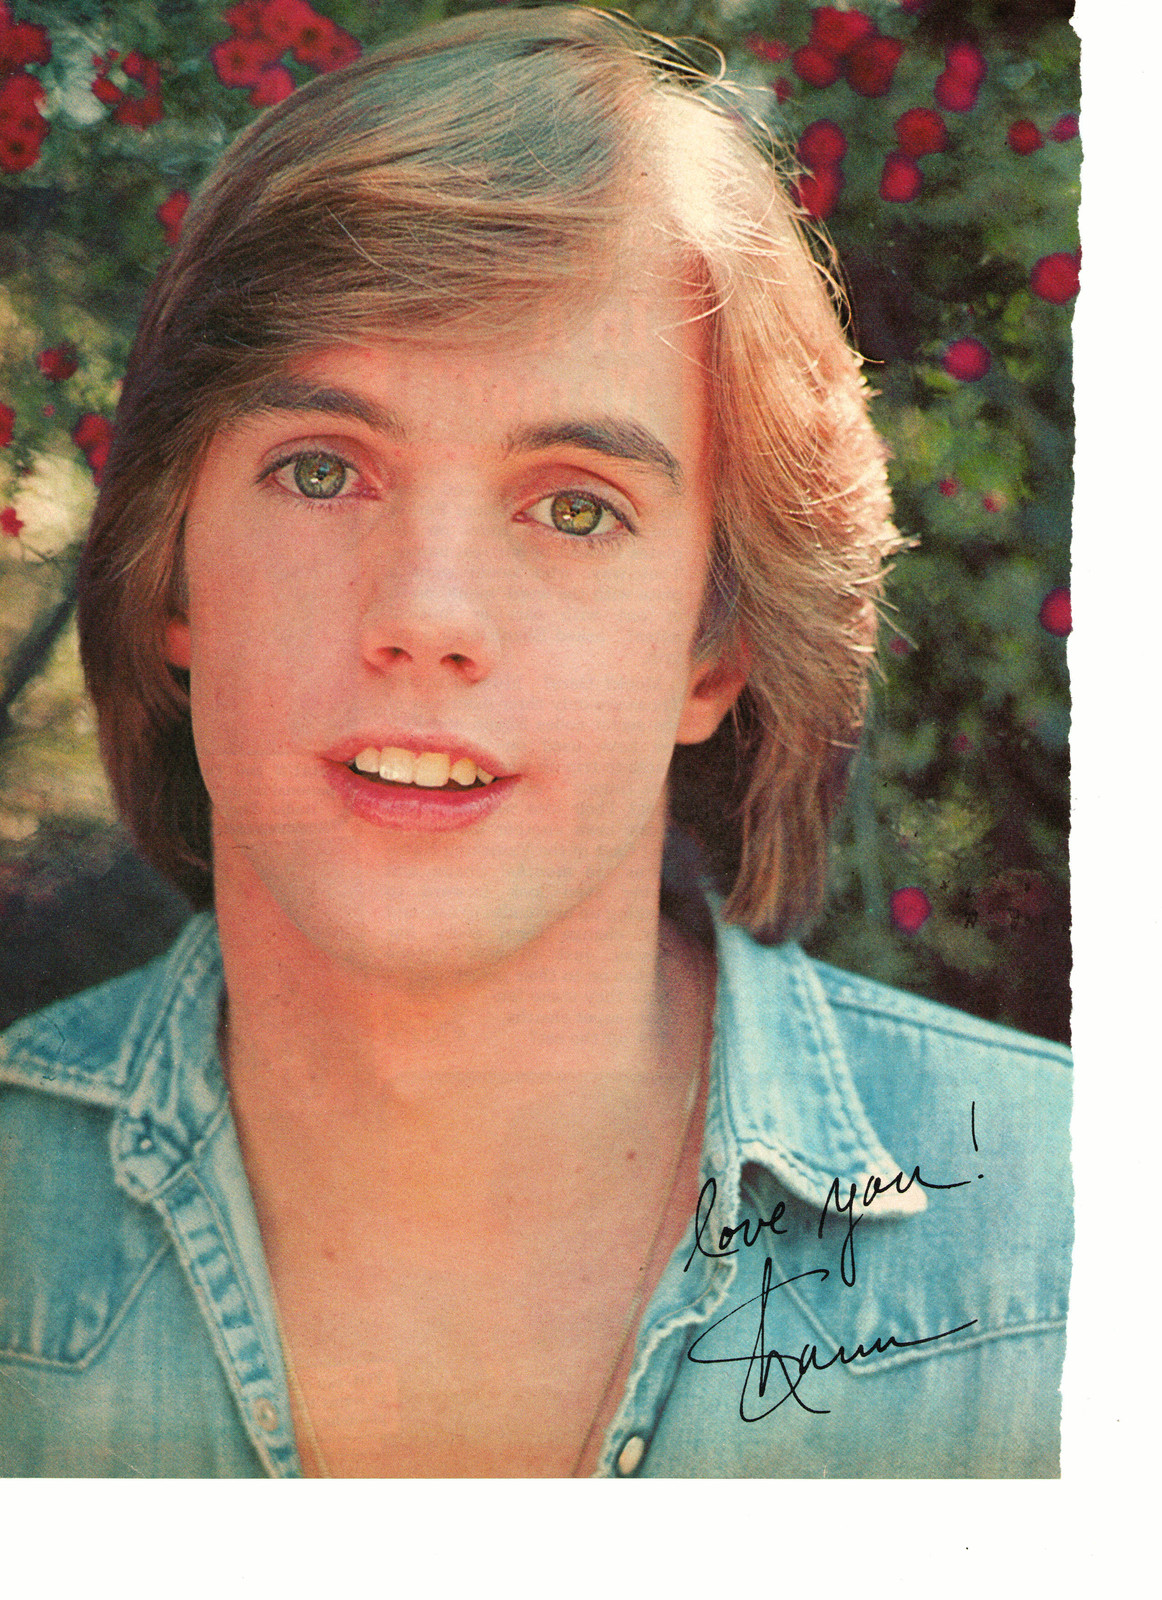 Show full-size image of Shaun Cassidy teen magazine pinup clipping close up...